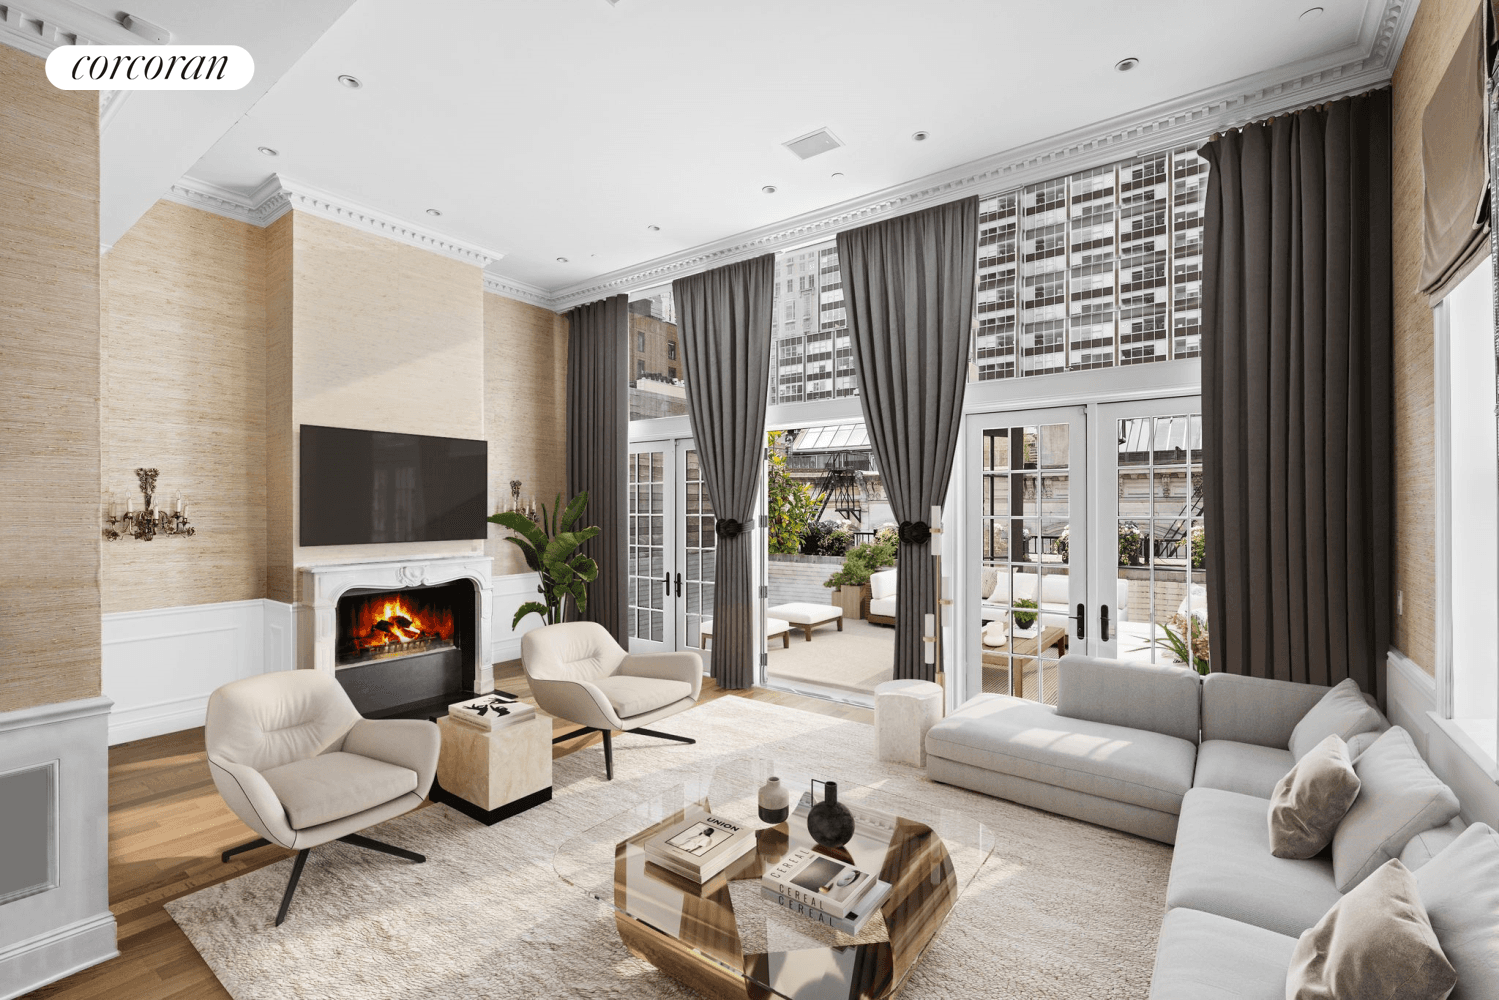 The MSH Team is delighted to introduce you to the Penthouse at 54 Warren, an extravagant amp ; one of a kind duplex residence in the heart of Tribeca !